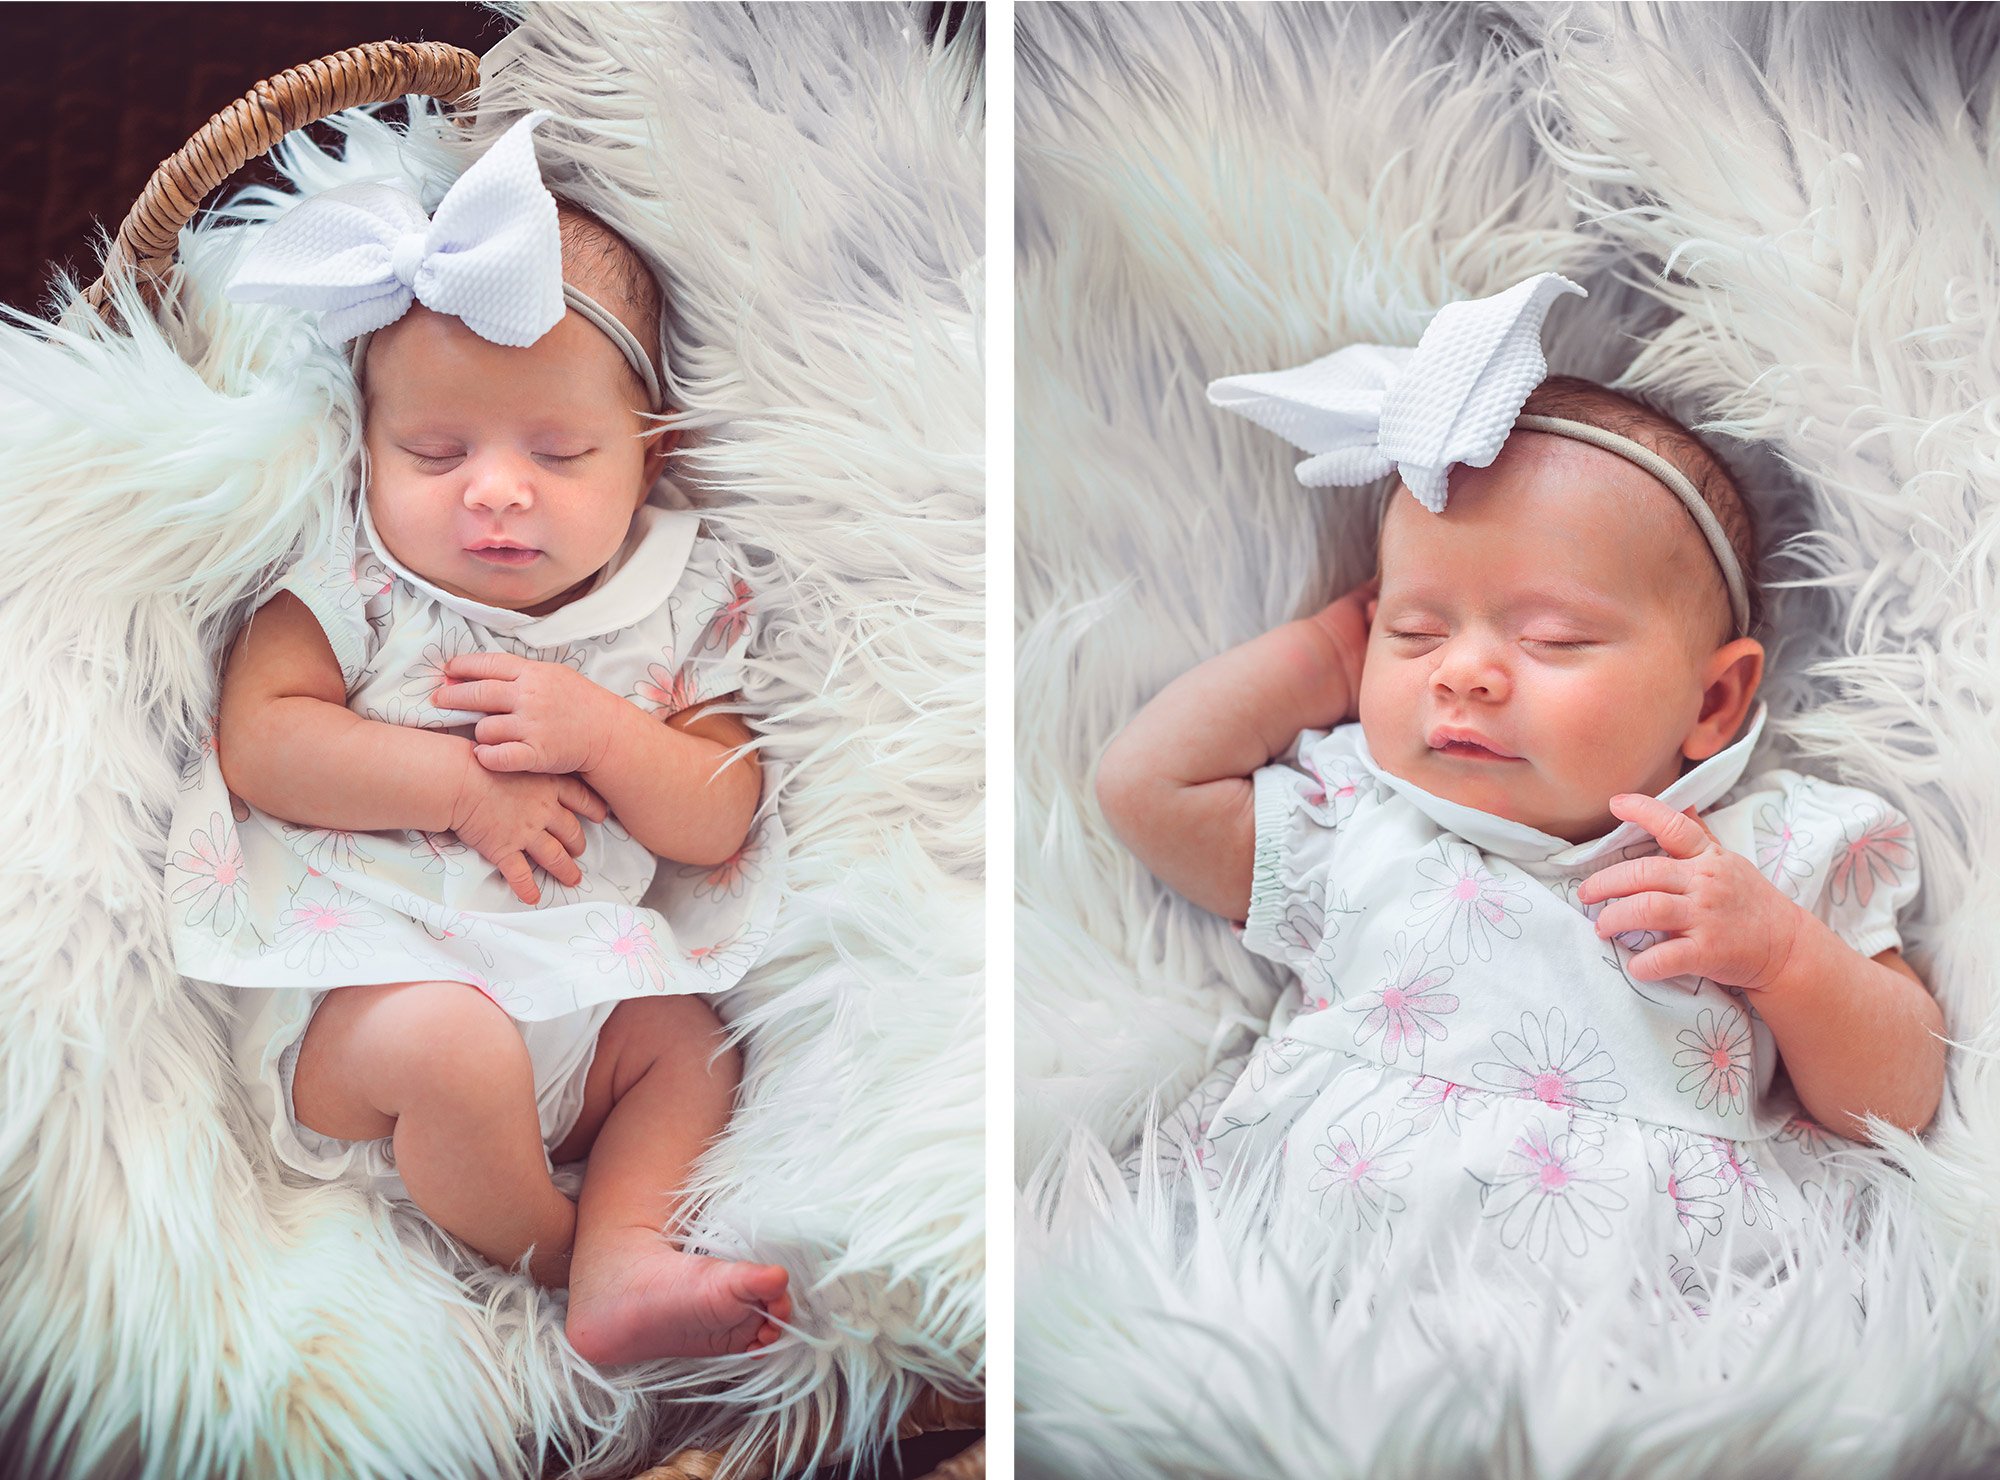 Marblehead In-Home Newborn Session - Stephen Grant Photography